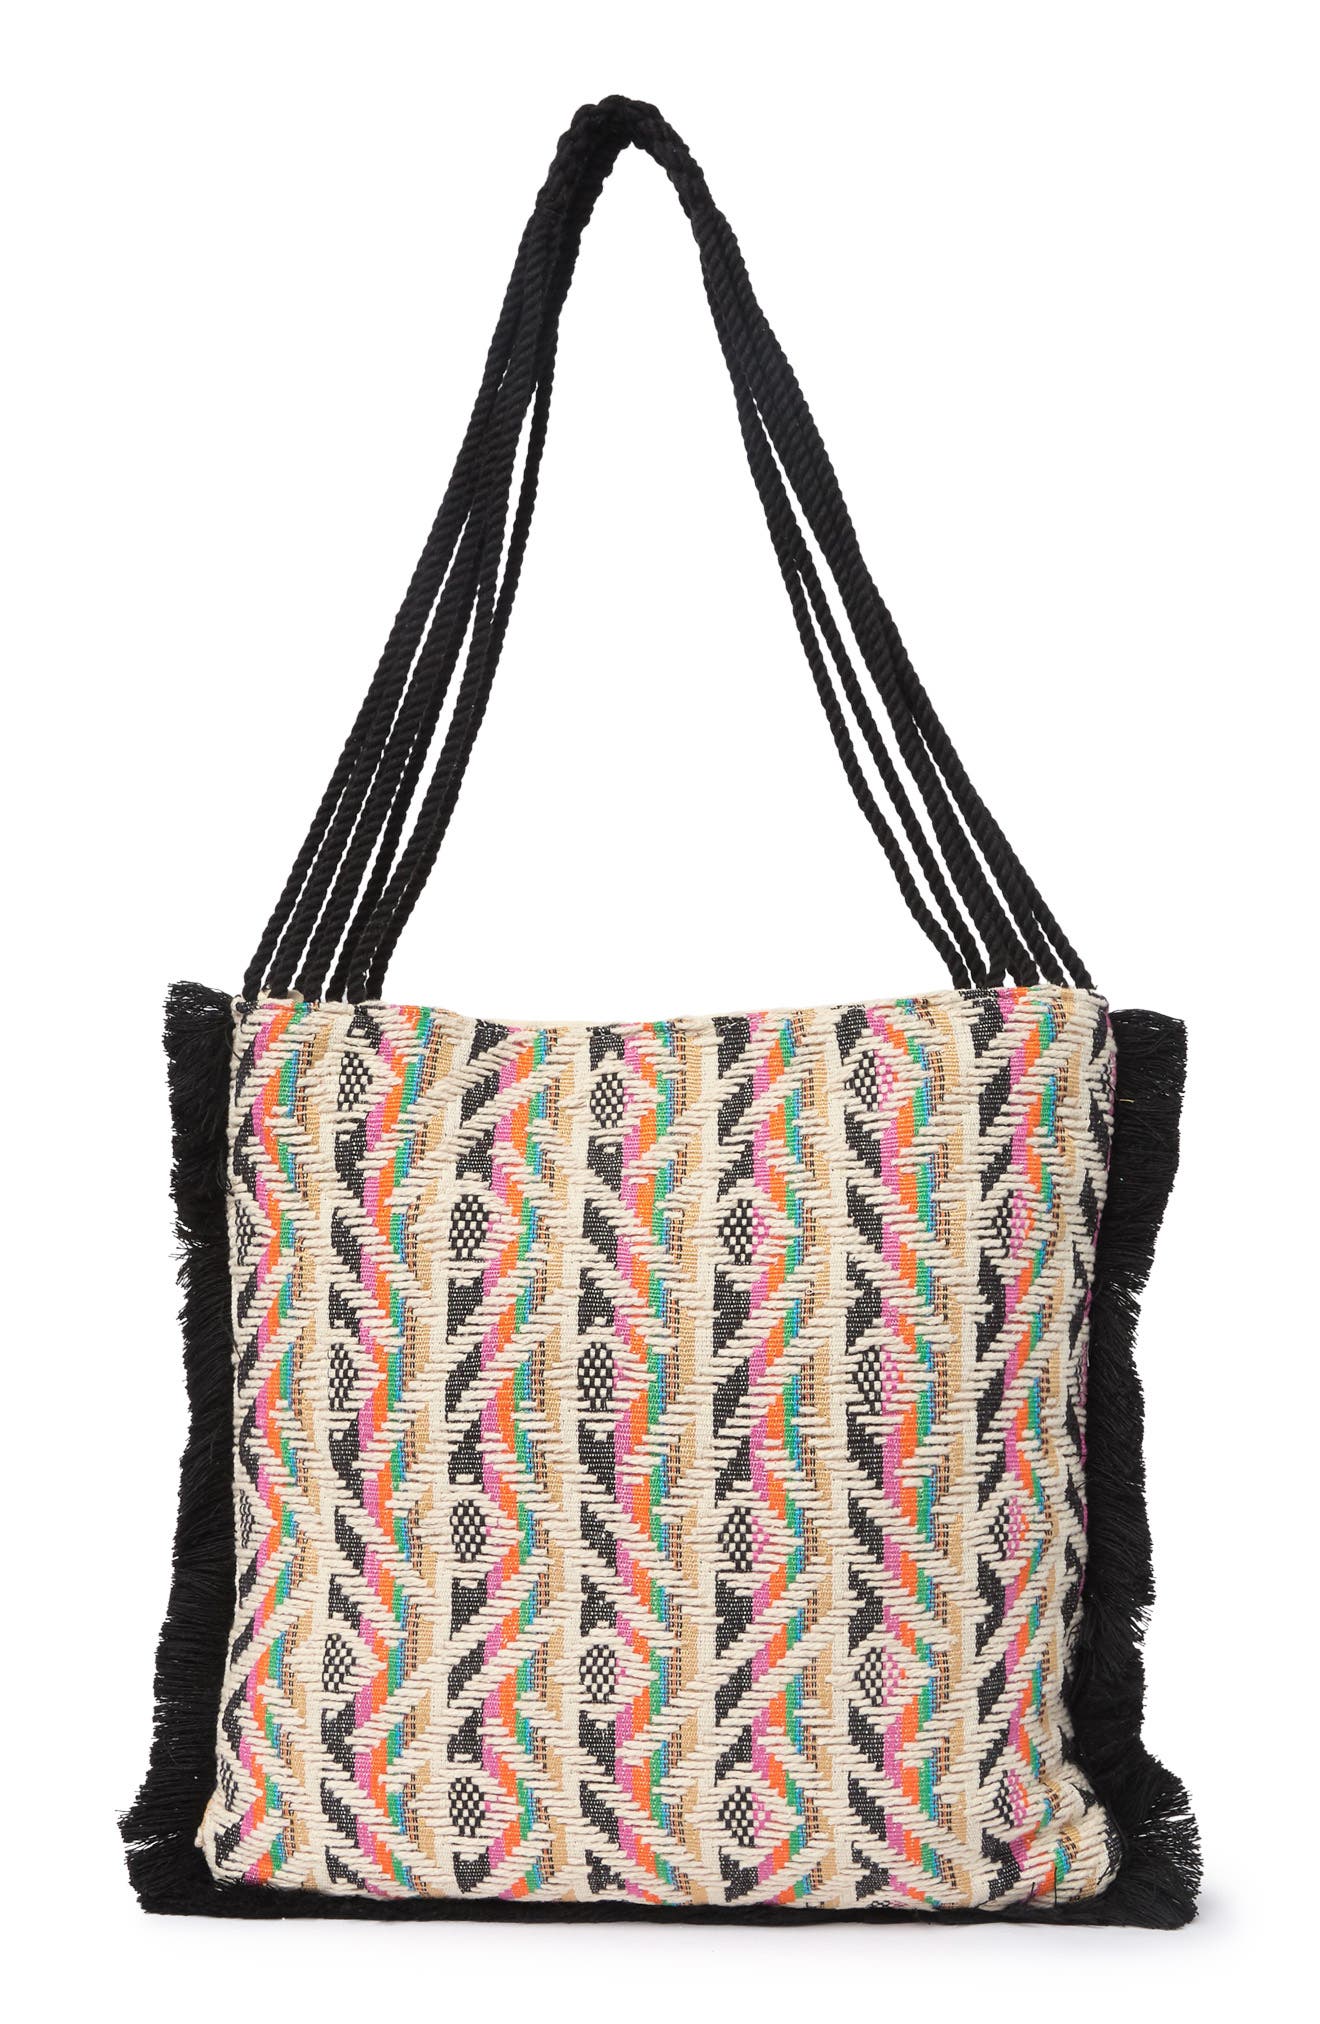 Twig & Arrow Woven Fringe Beach Tote Bag In Open Miscellaneous1